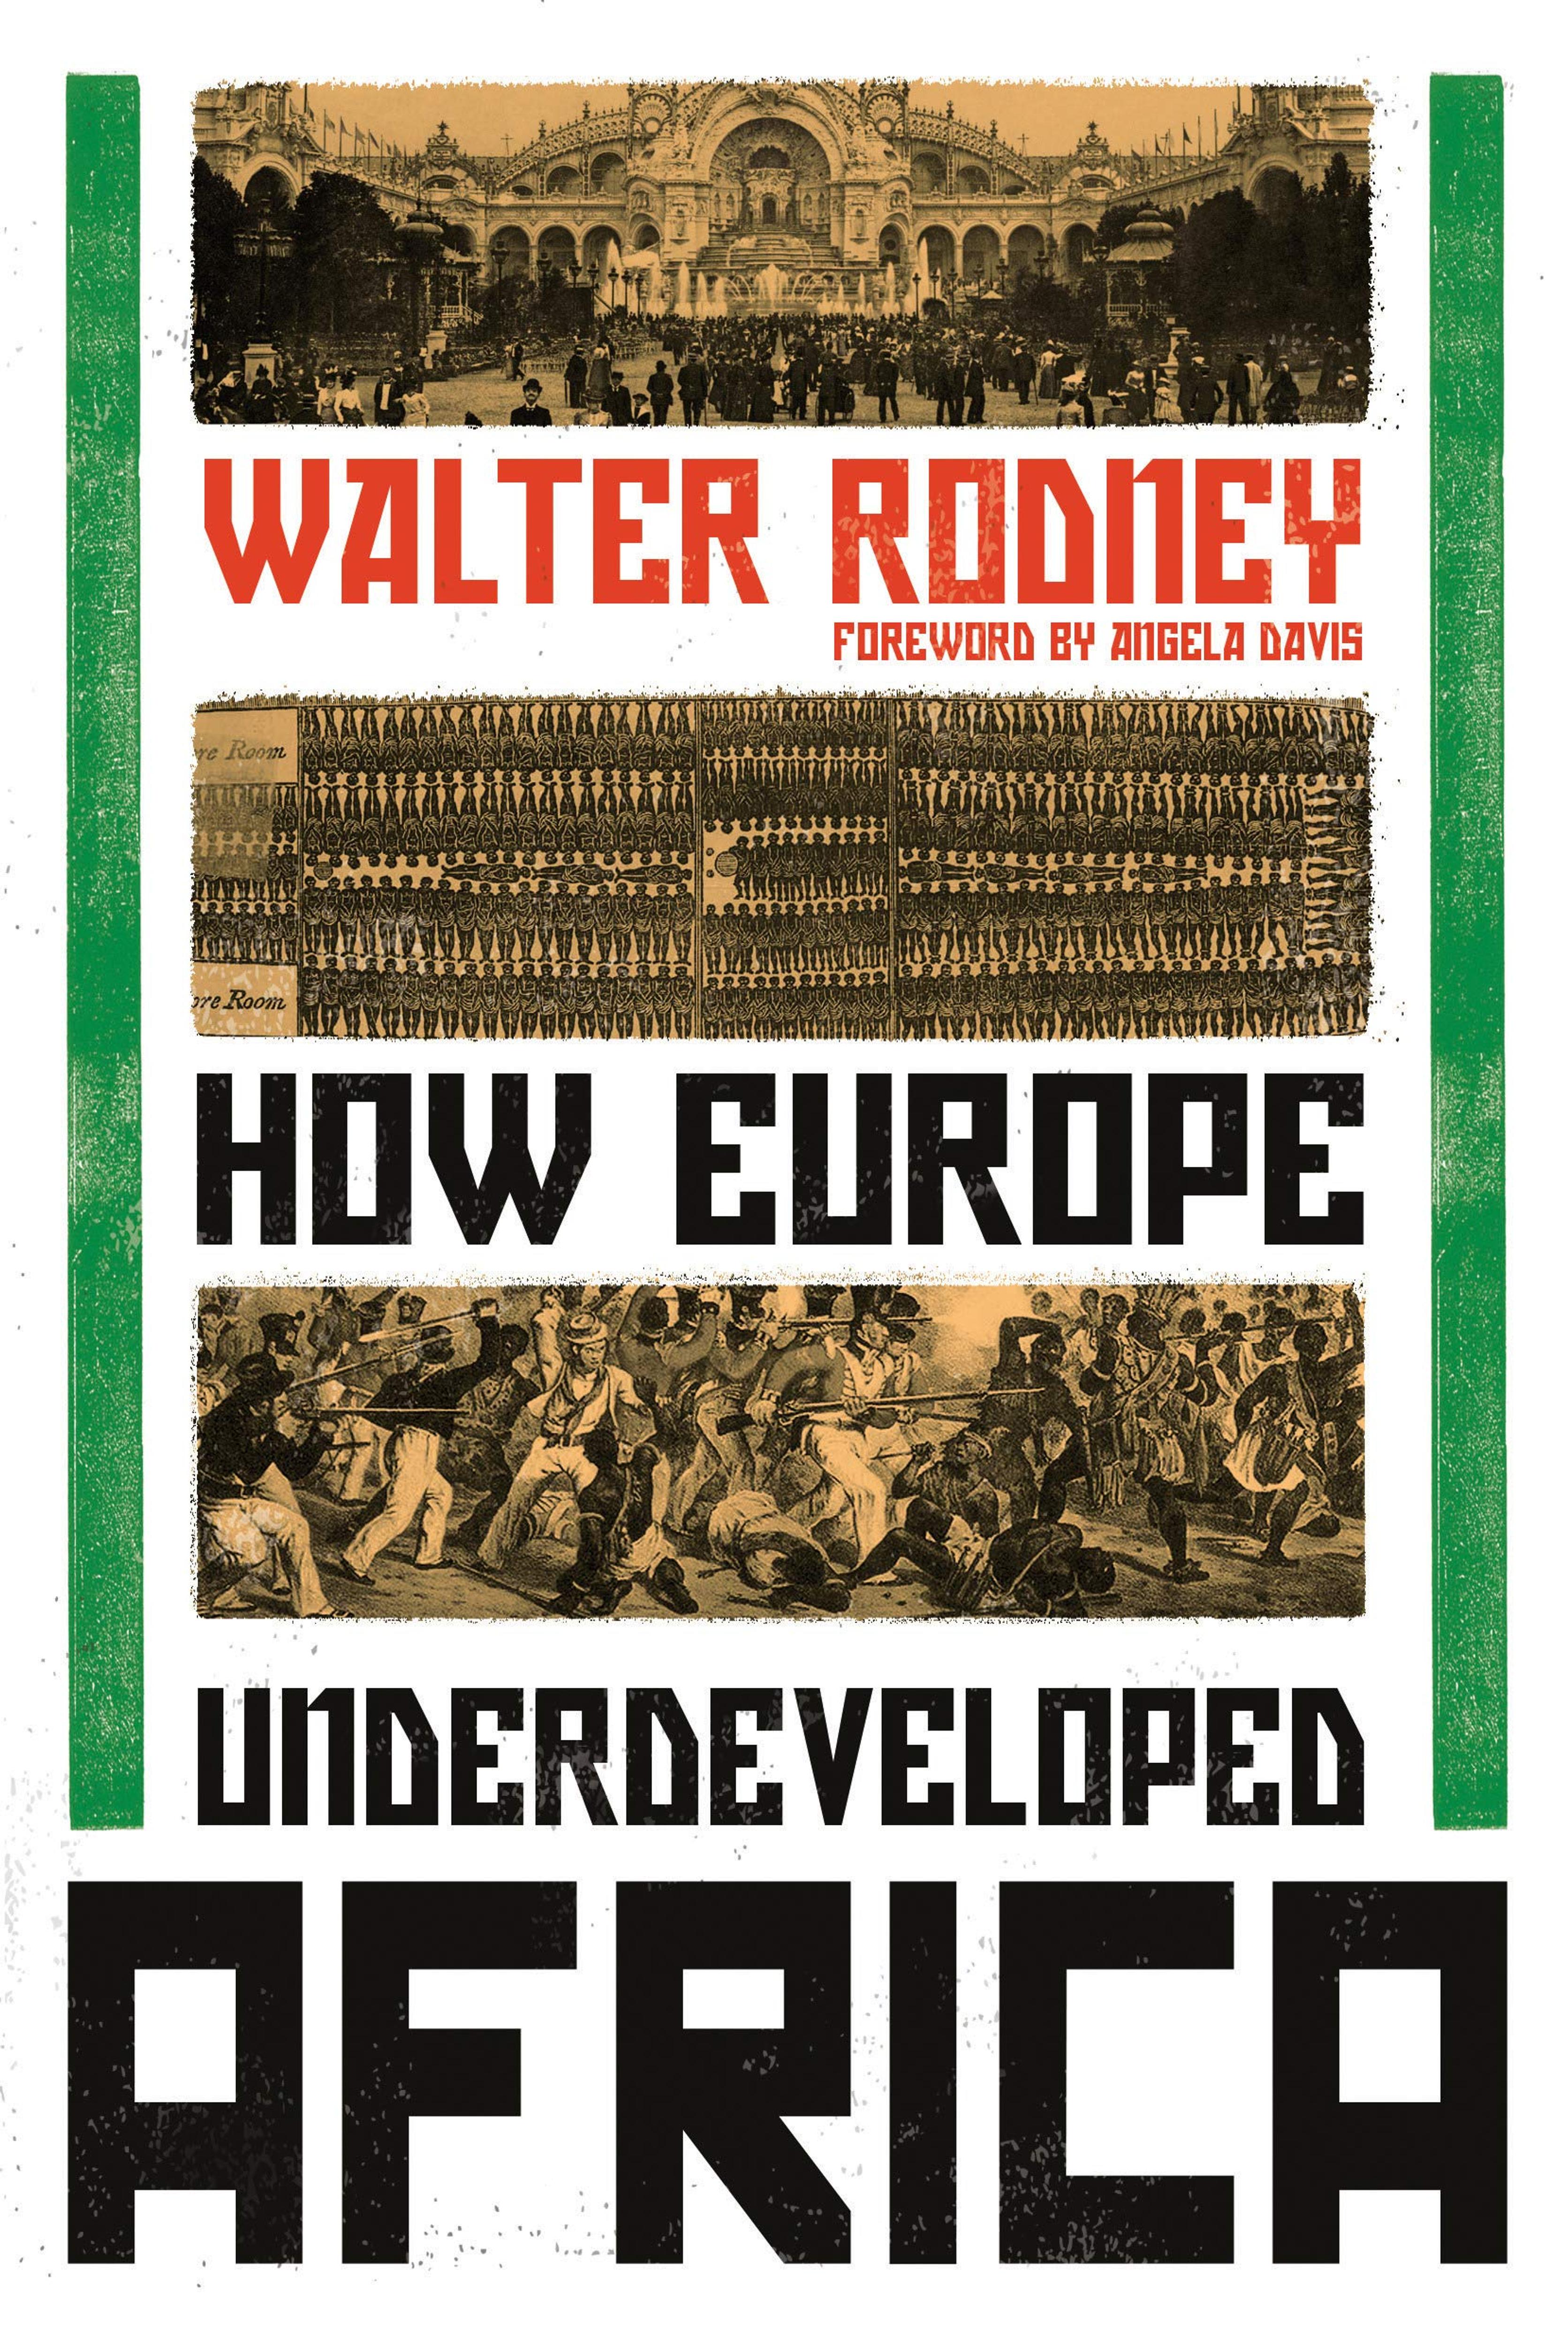 The Persisting Relevance of Walter Rodney’s “How Europe Underdeveloped Africa”